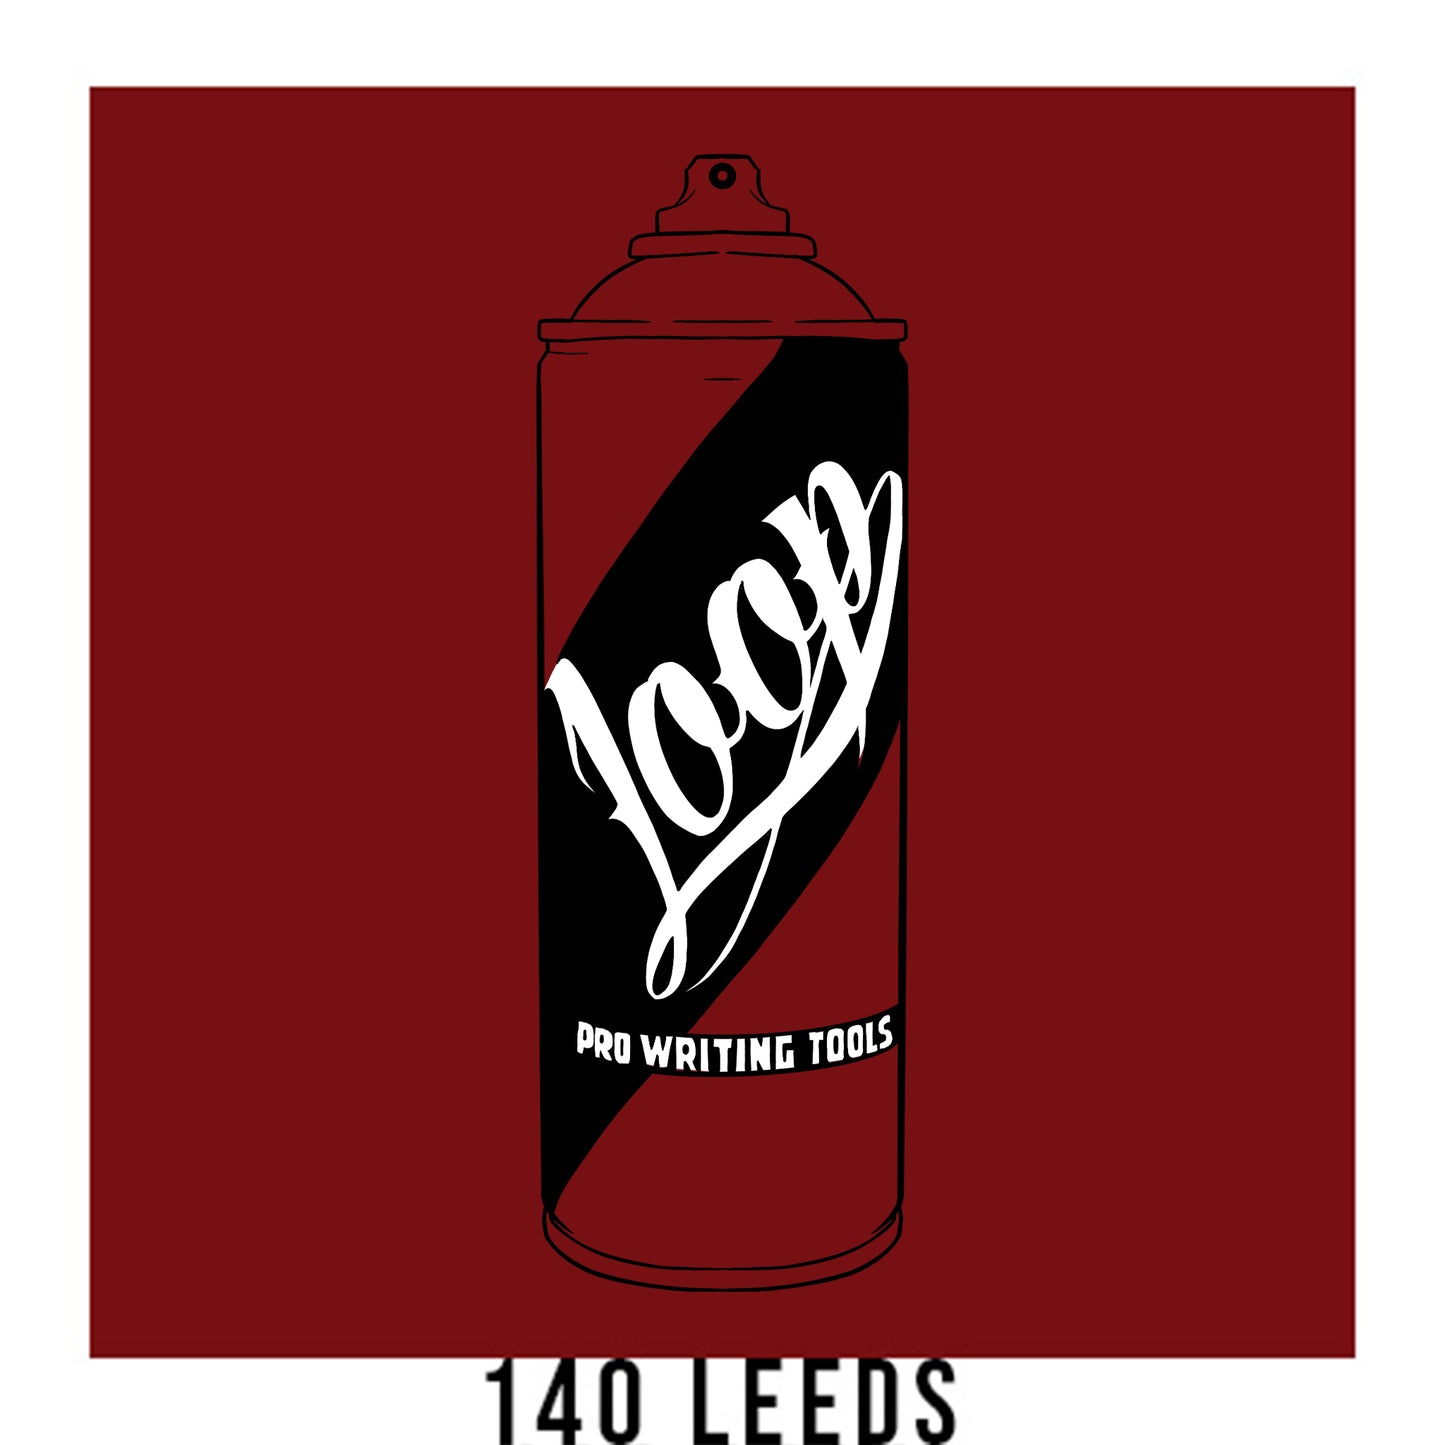 A black outline drawing of a dark red spray paint can with the word "Loop" written on the face in script. The background is a color swatch of the same dark red with a white border with the words "140 leeds" at the bottom.